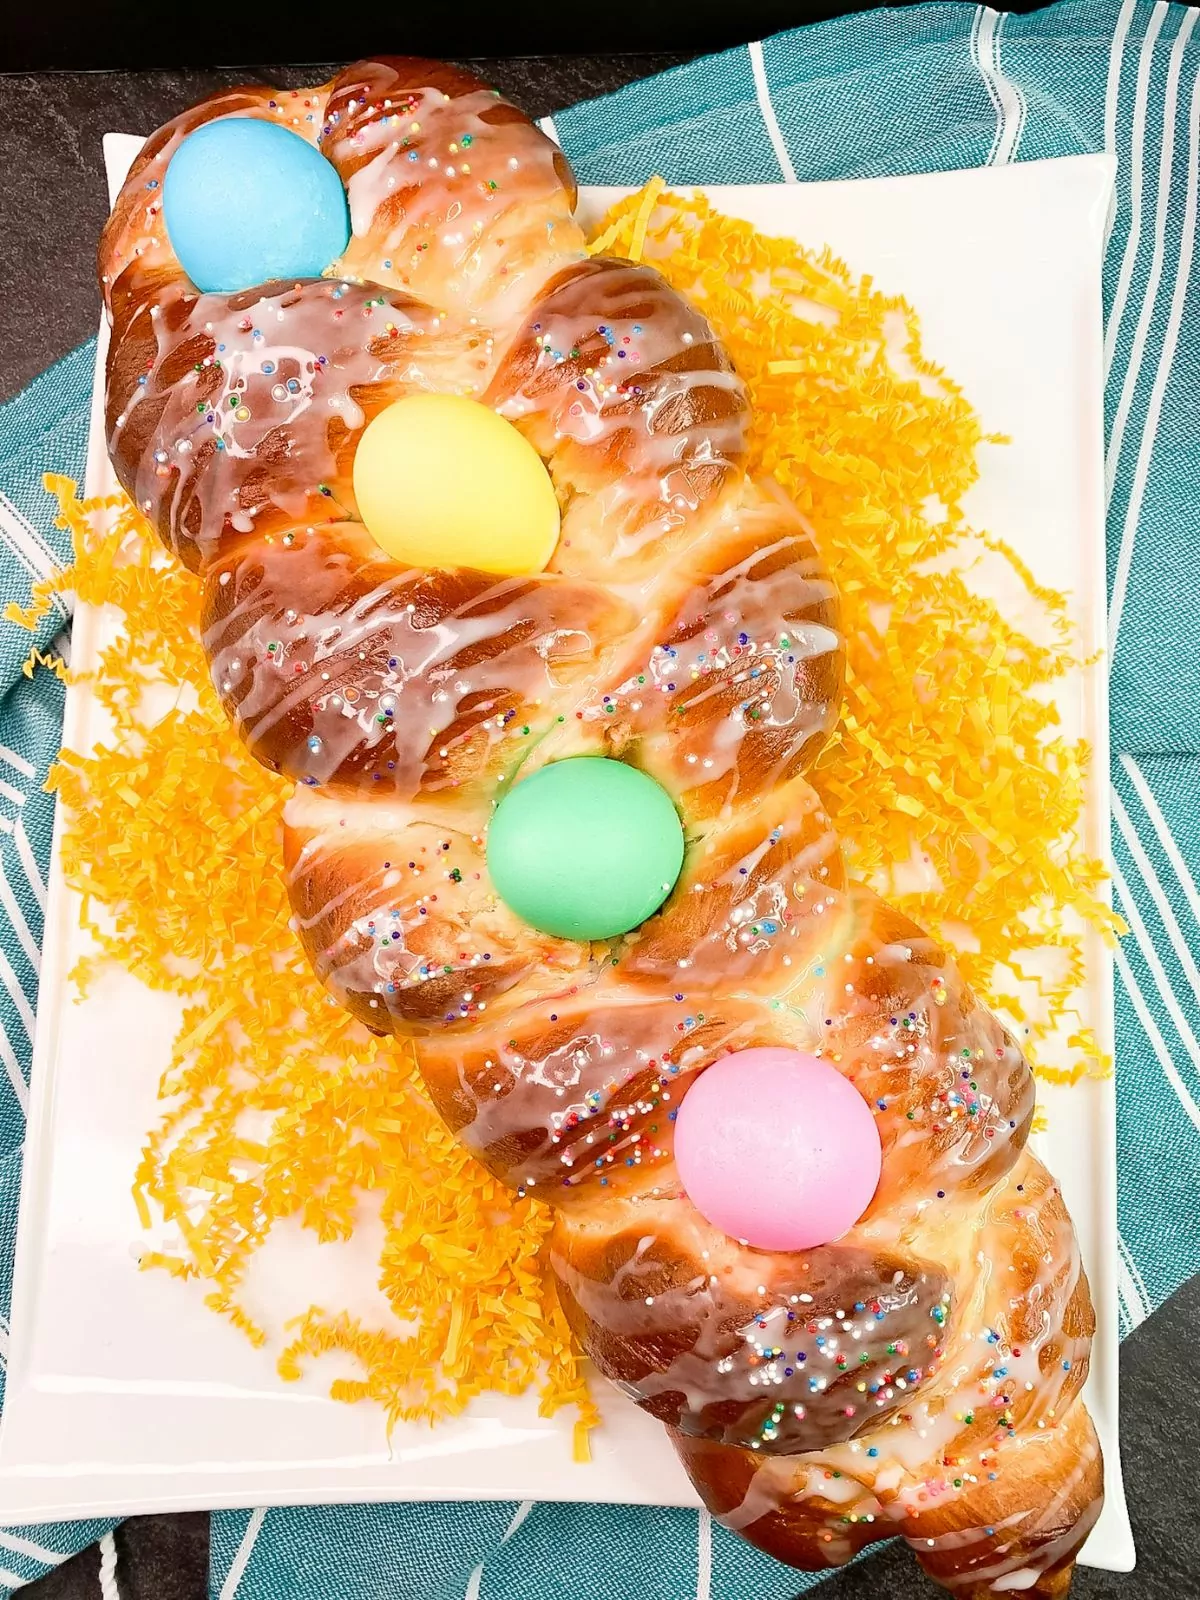 loaf of braided Easter bread with colored eggs on white tray.